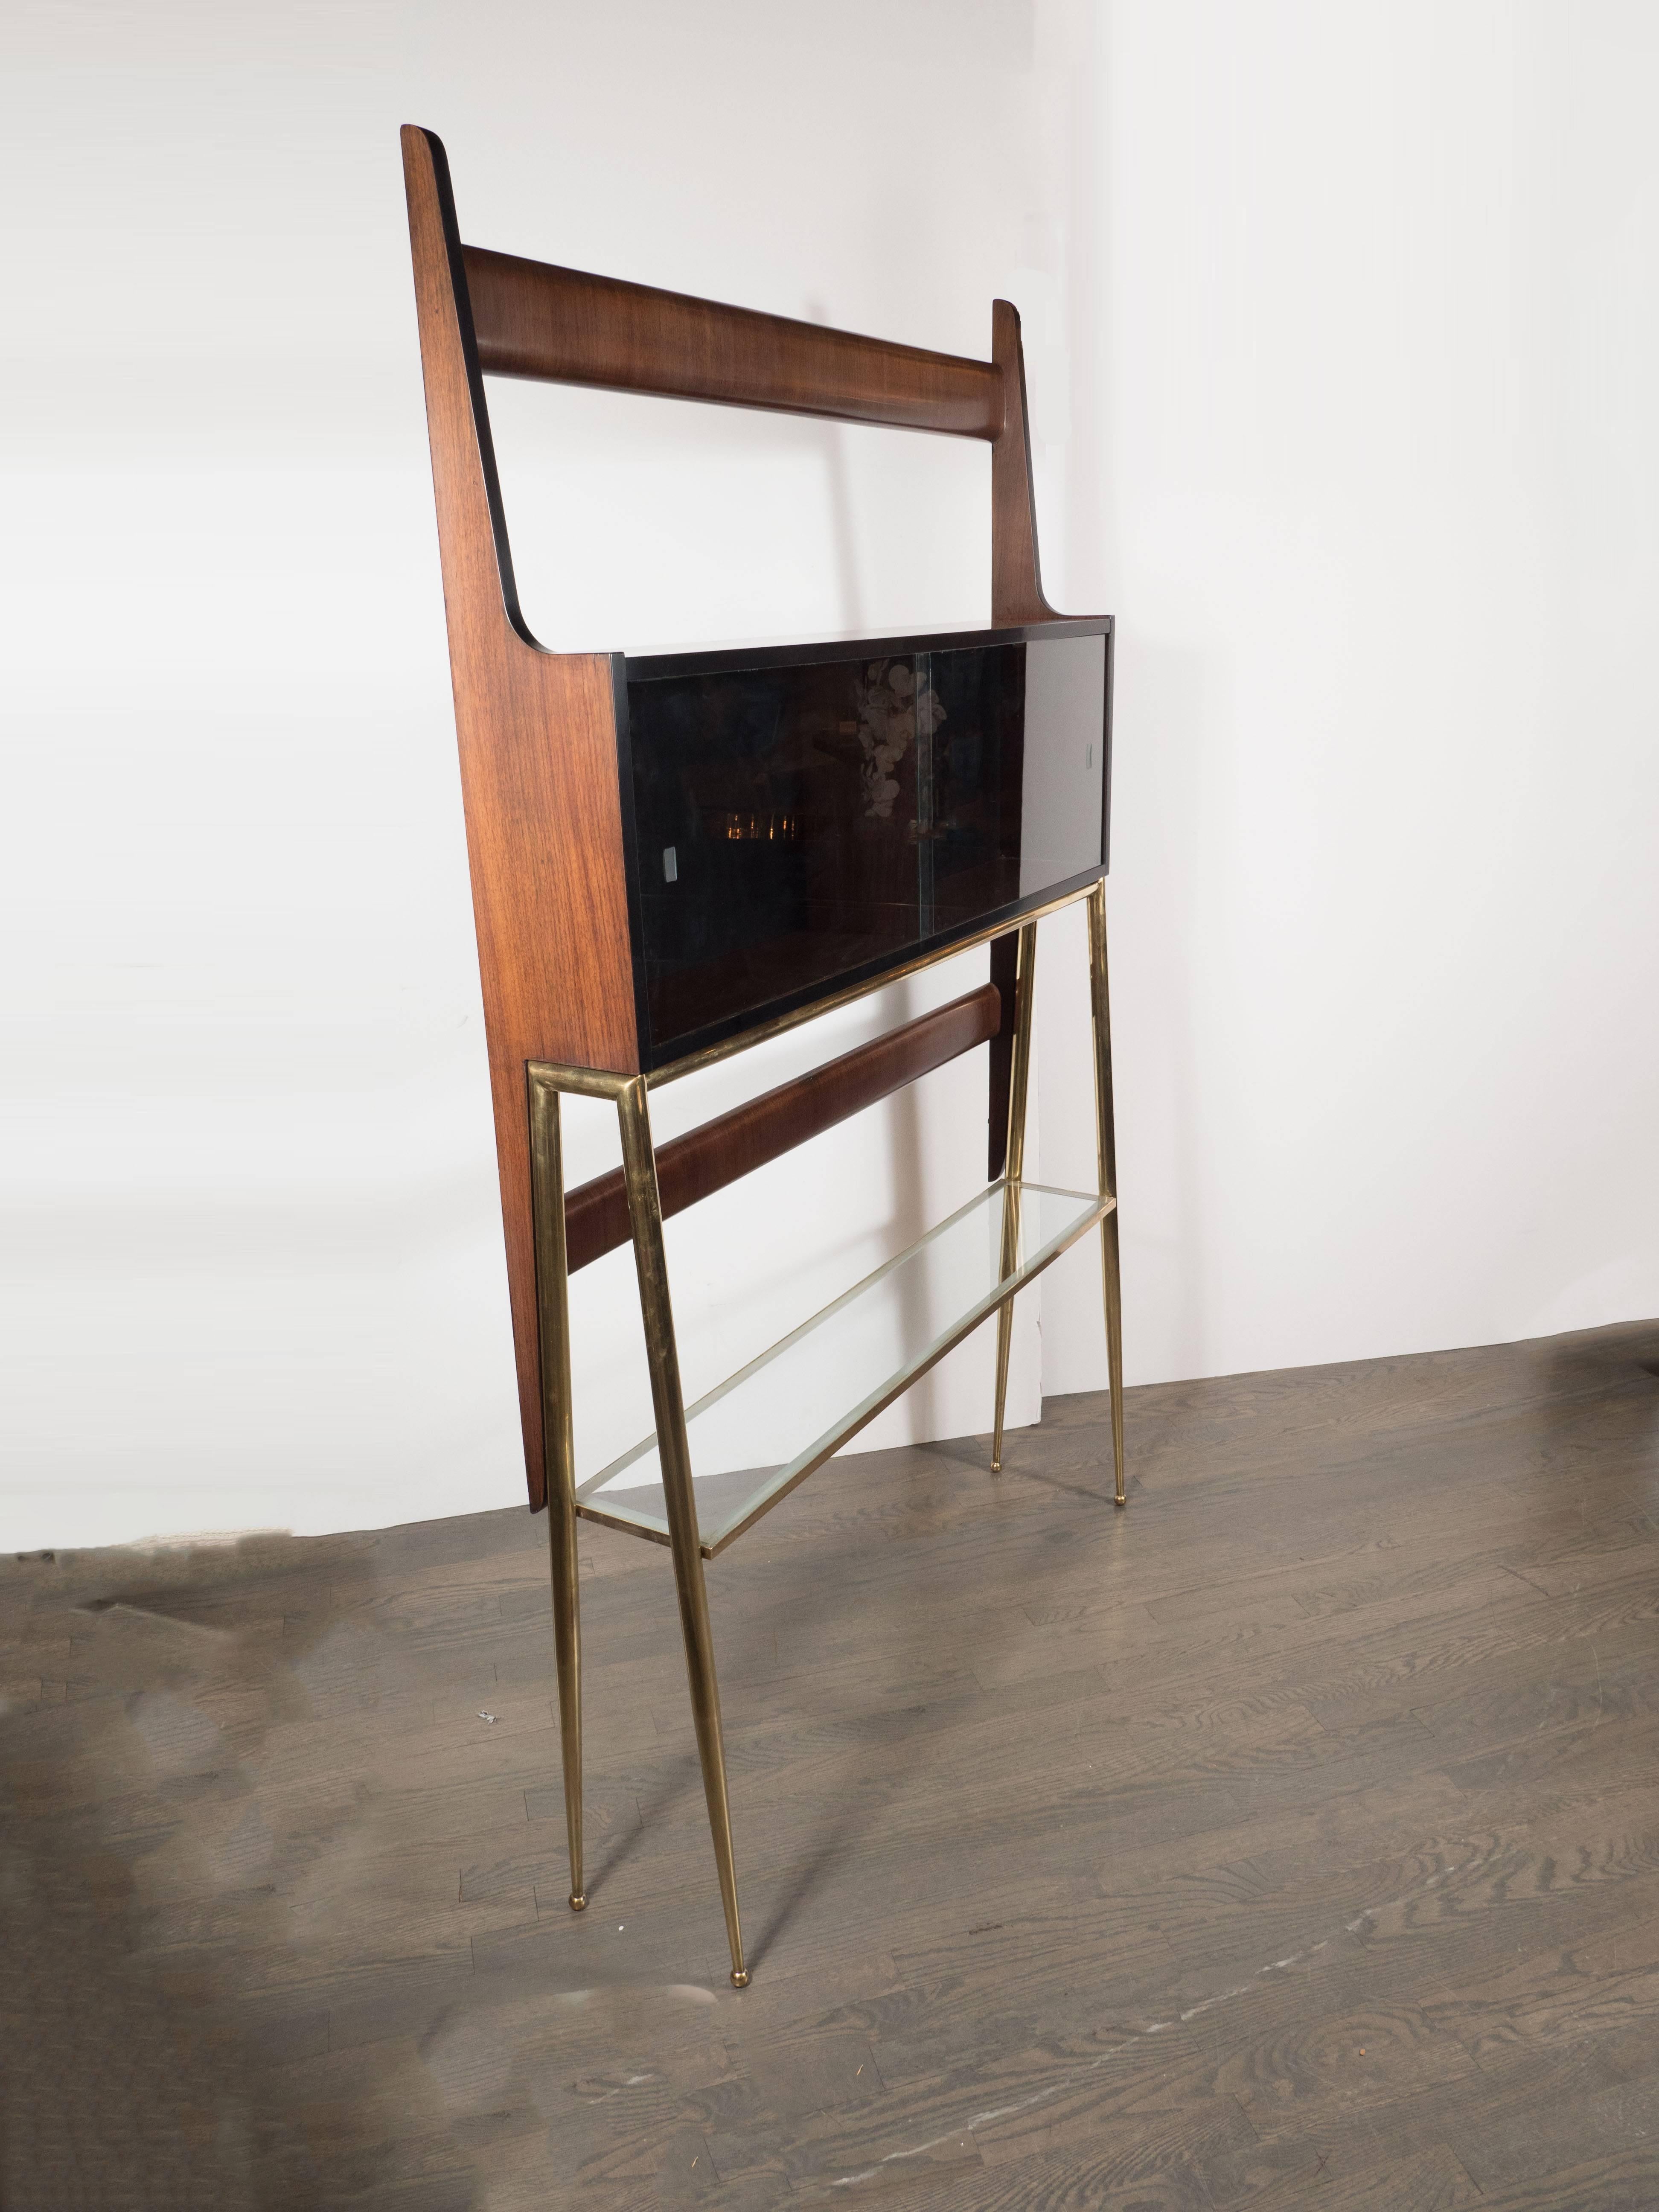 Sculptural Italian Mid-Century Modern Ètagére in Handrubbed Walnut and Brass For Sale 3